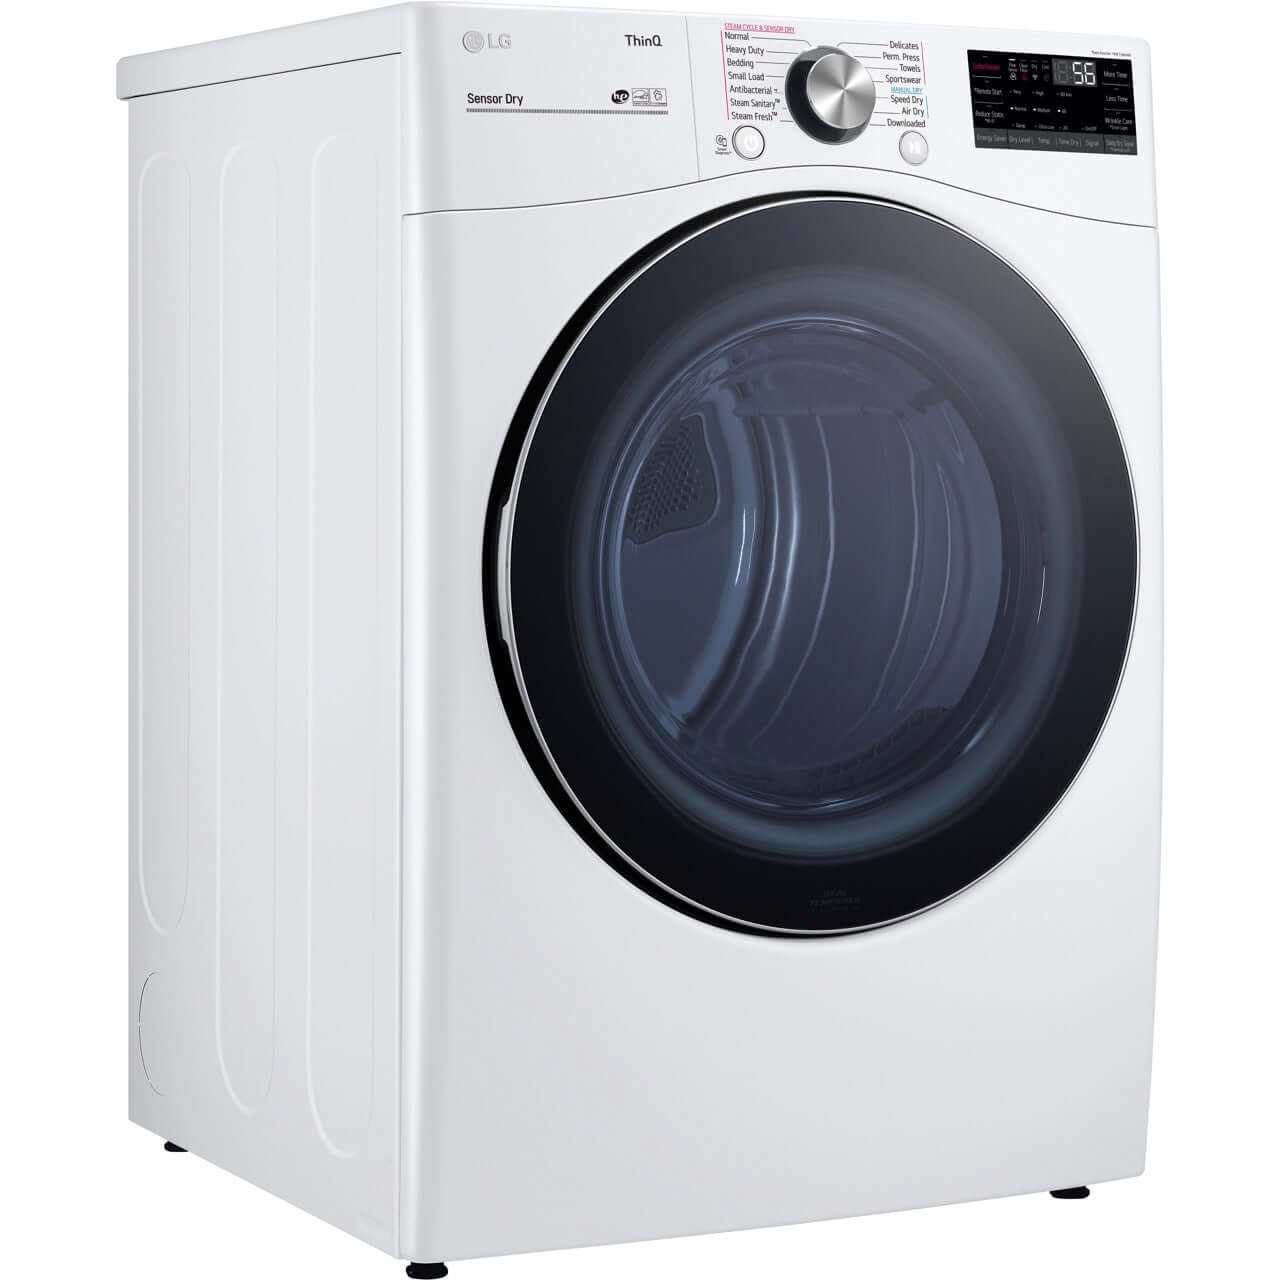 LG 27 In. 7.4-Cu. Ft. Front Load Gas Dryer with TurboSteam and Built-In Intelligence in White (DLGX4201W)